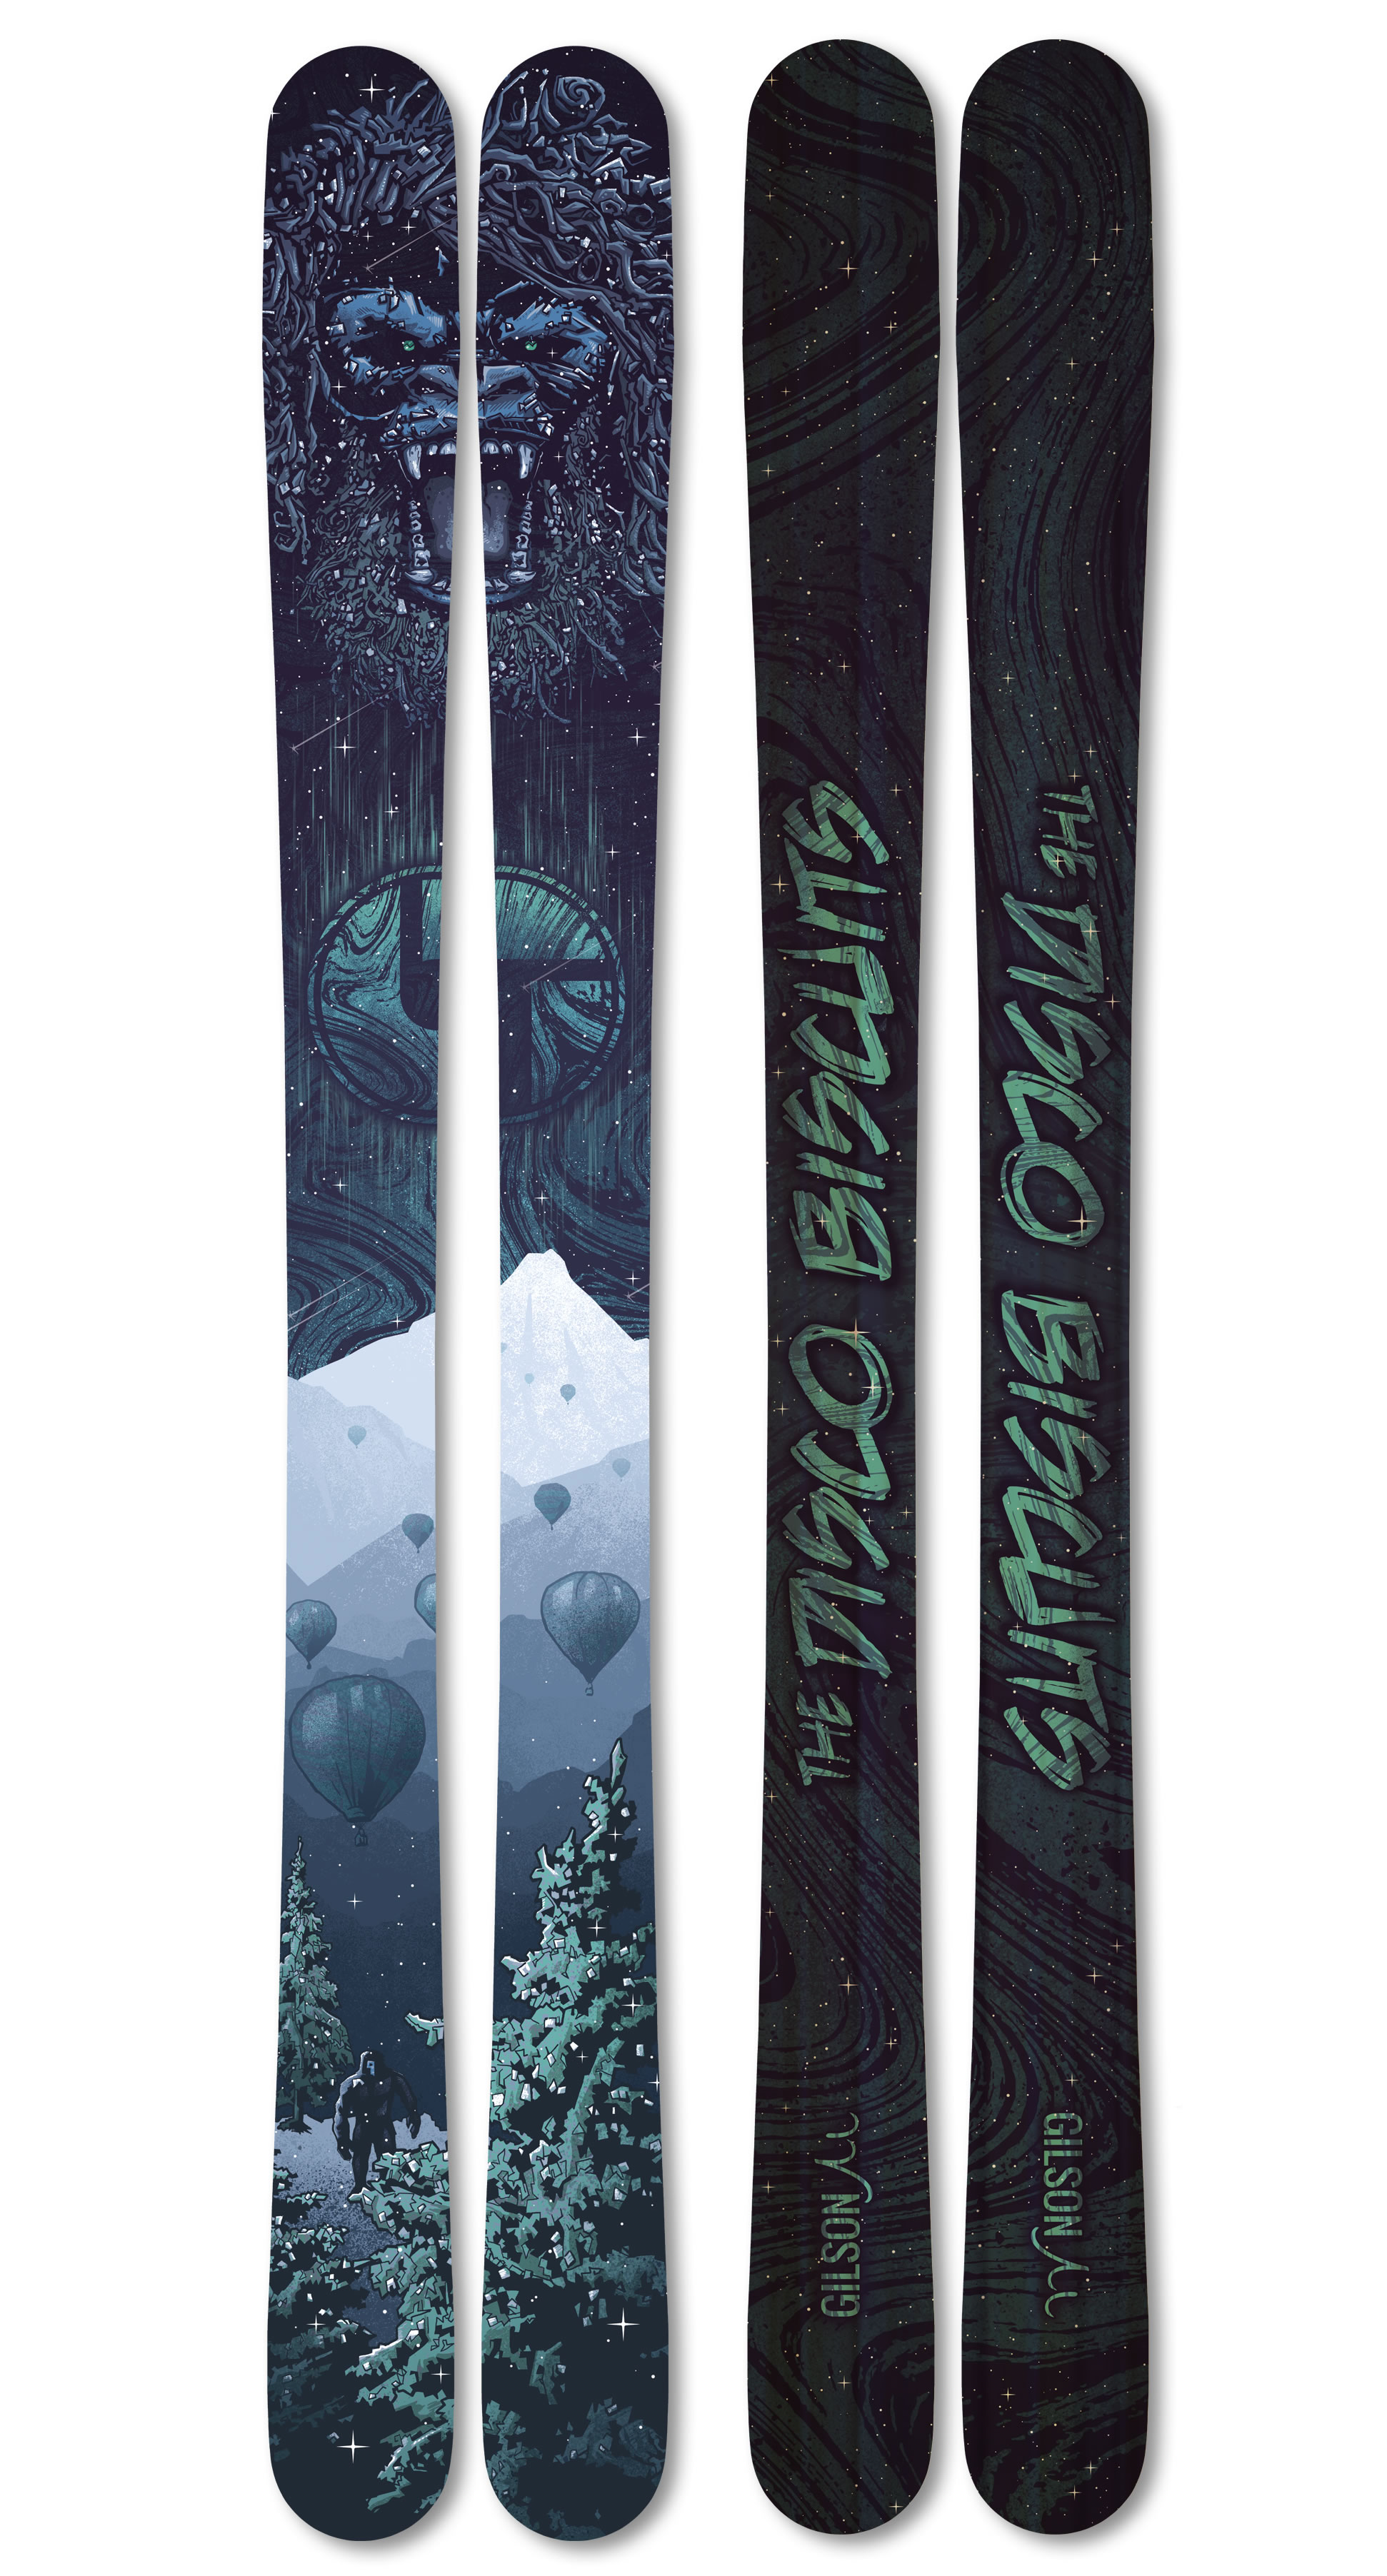 Disco biscuits skis large